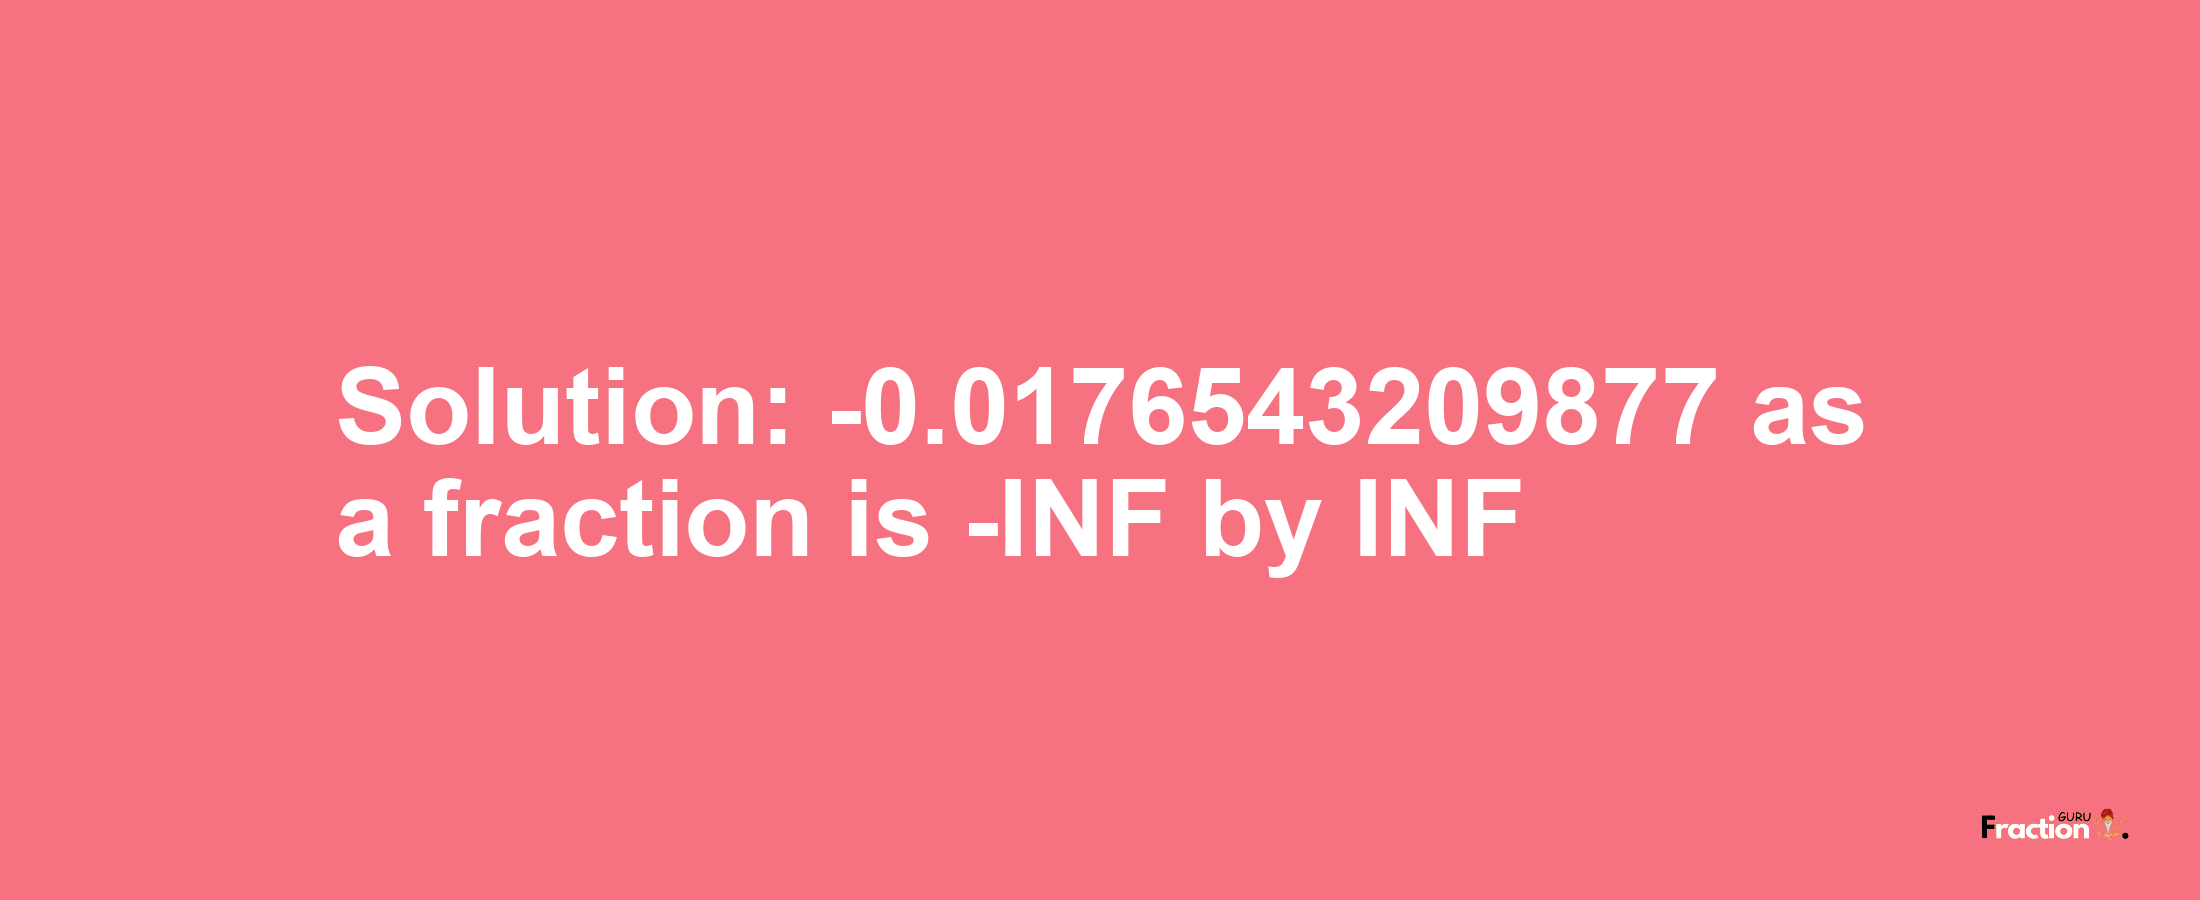 Solution:-0.0176543209877 as a fraction is -INF/INF